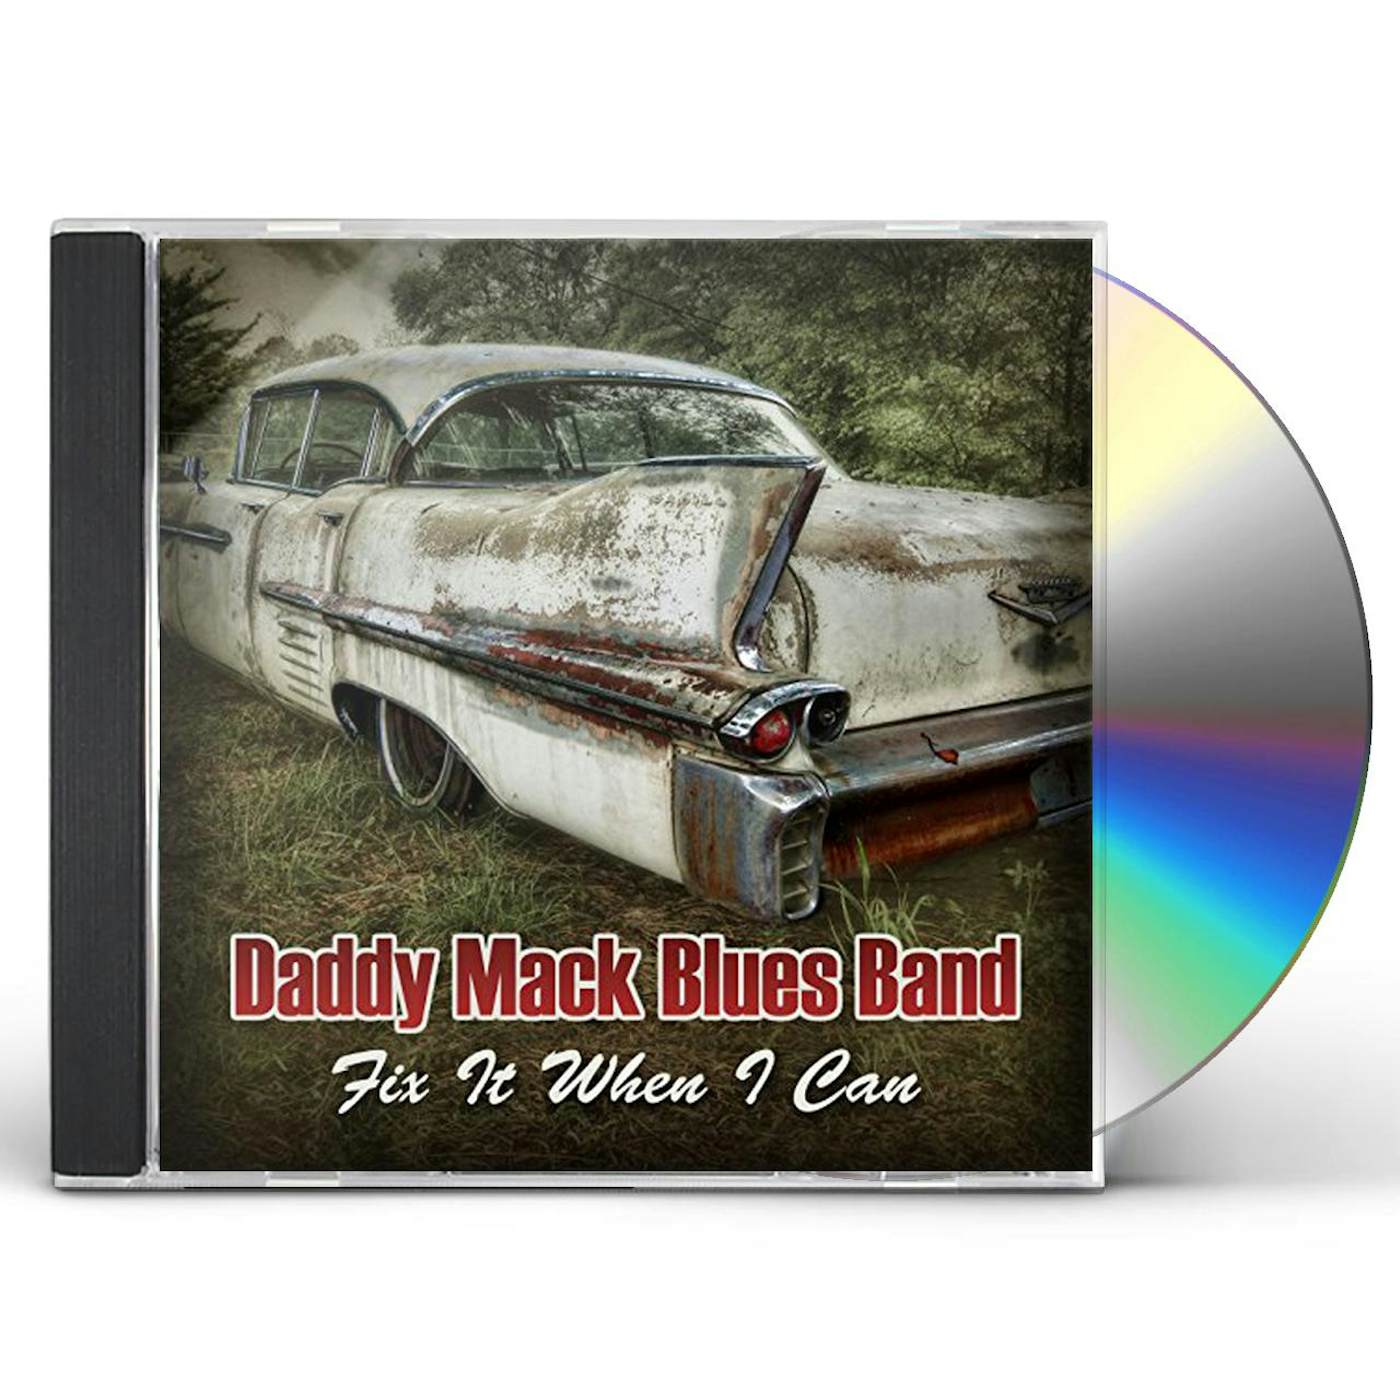 Daddy Mack Blues Band FIX IT WHEN I CAN CD